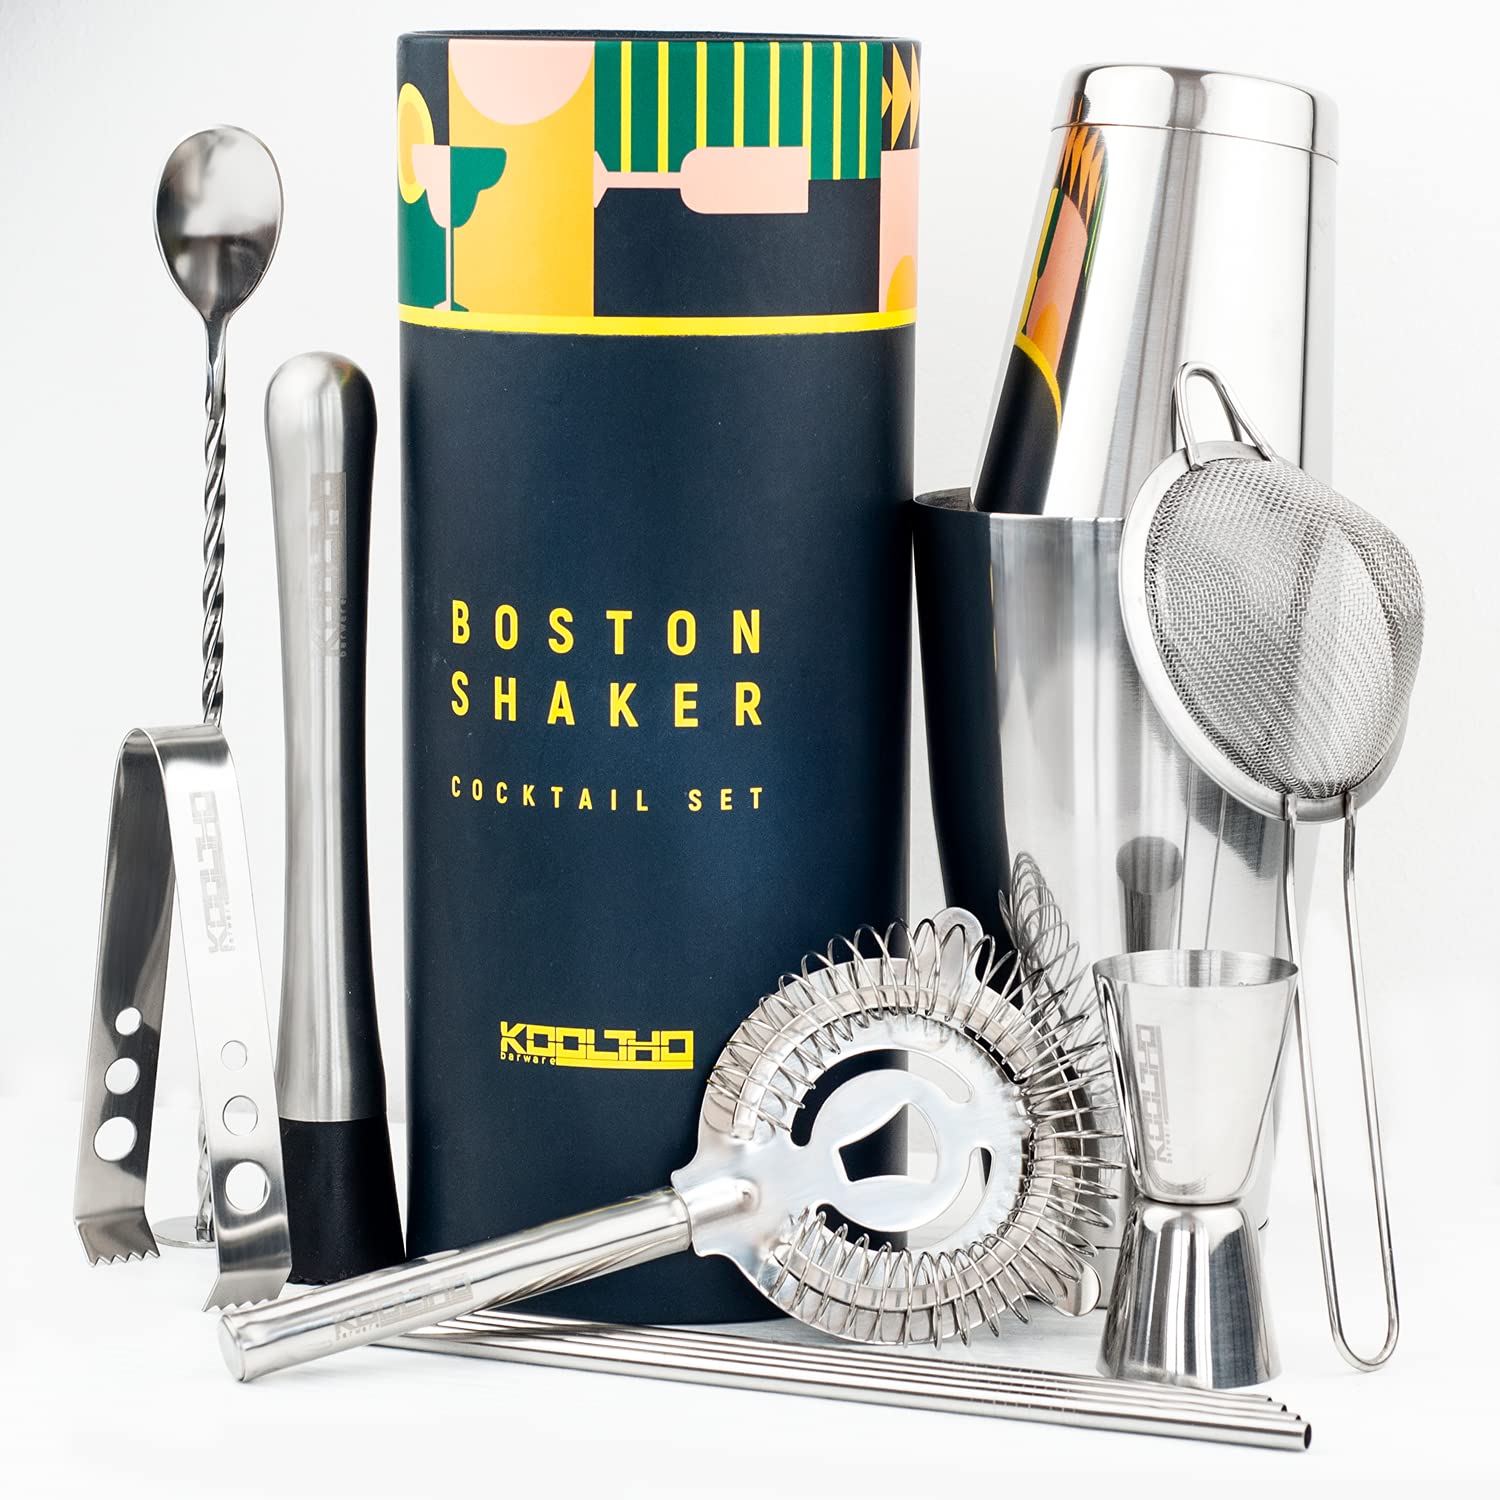 Boston Shaker Set Cocktail Kit, Full Bar Mixer Sets for Professional Bartender, Stainless Steel Drink Shakers Weighted Tin with Strainer Jigger Spoon Muddler Straws, Cocktails Lovers Gifts Women Men